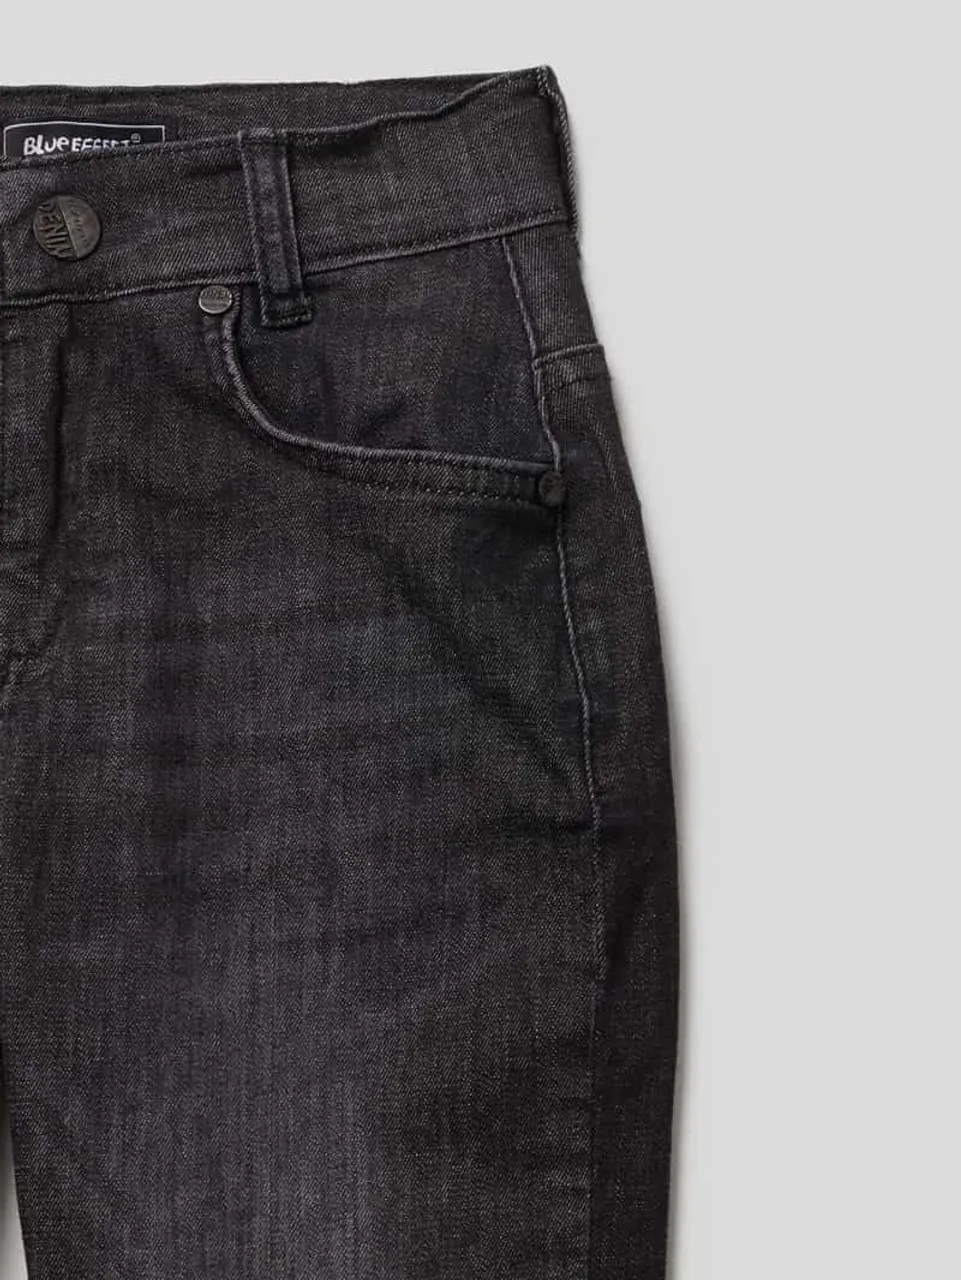 Blue Effect Jeans mit Label-Patch Modell 'Nos' in Black